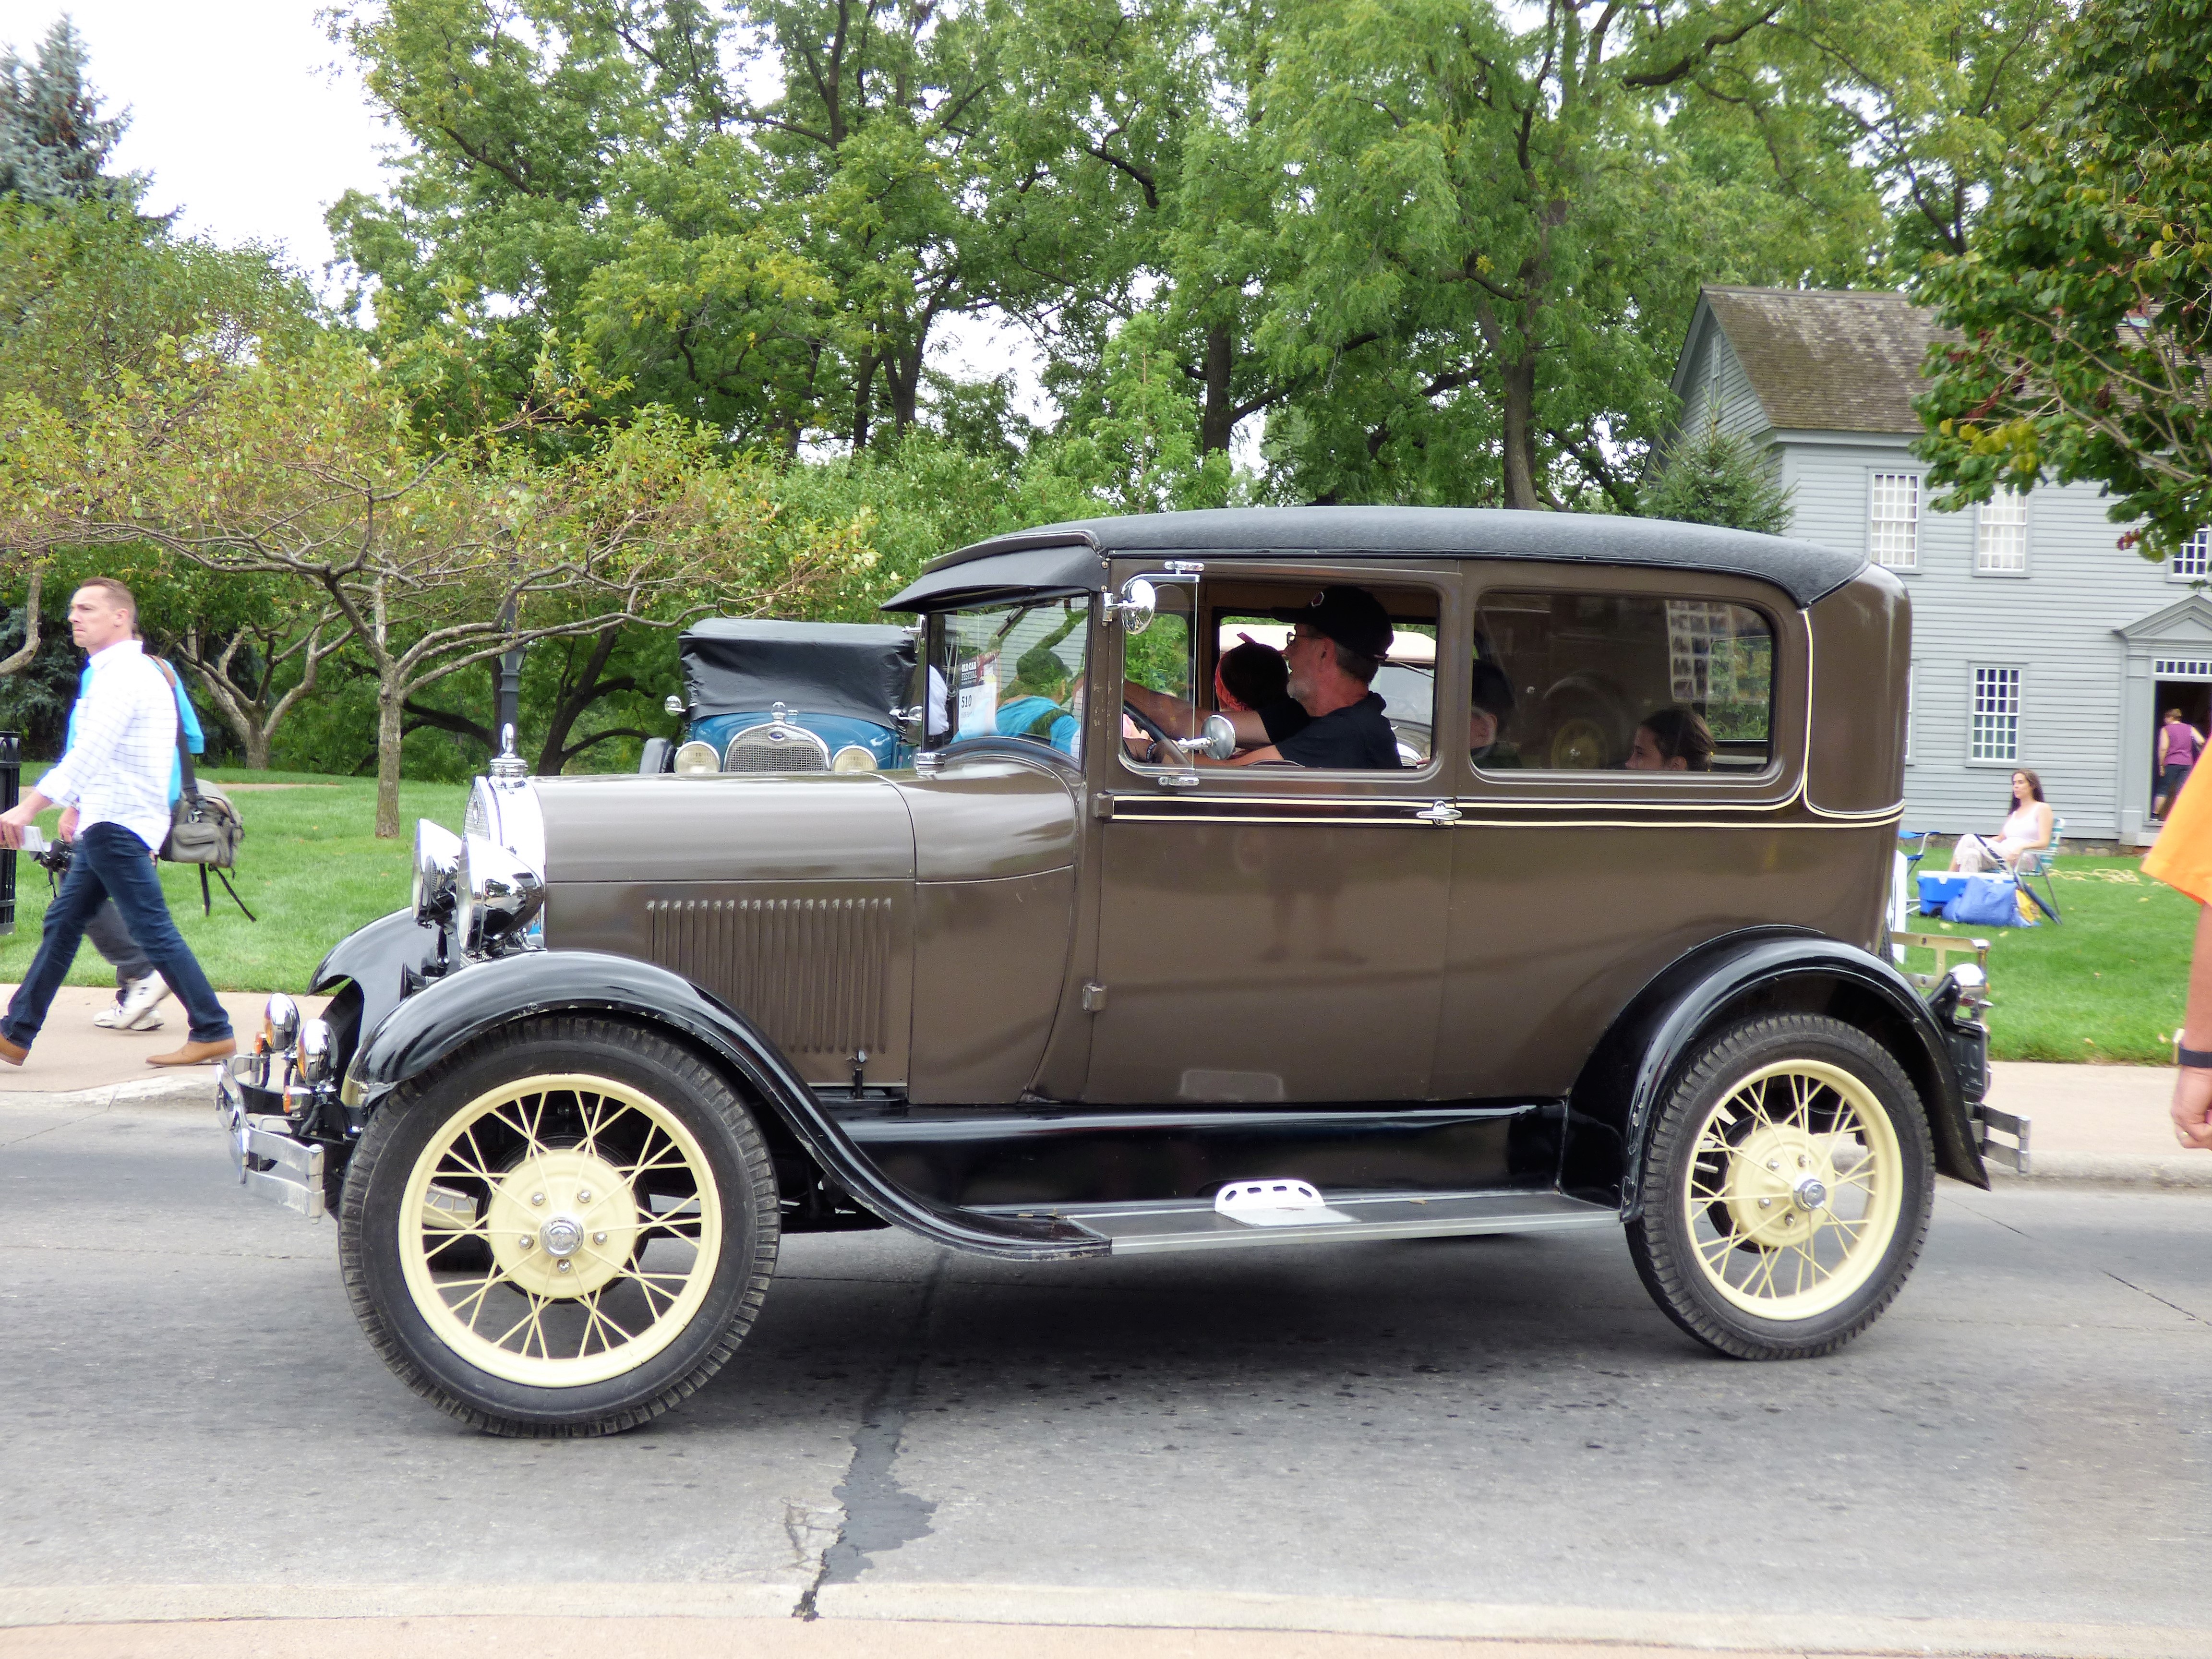 Classic 1930s car painted brown with whitewall tires.